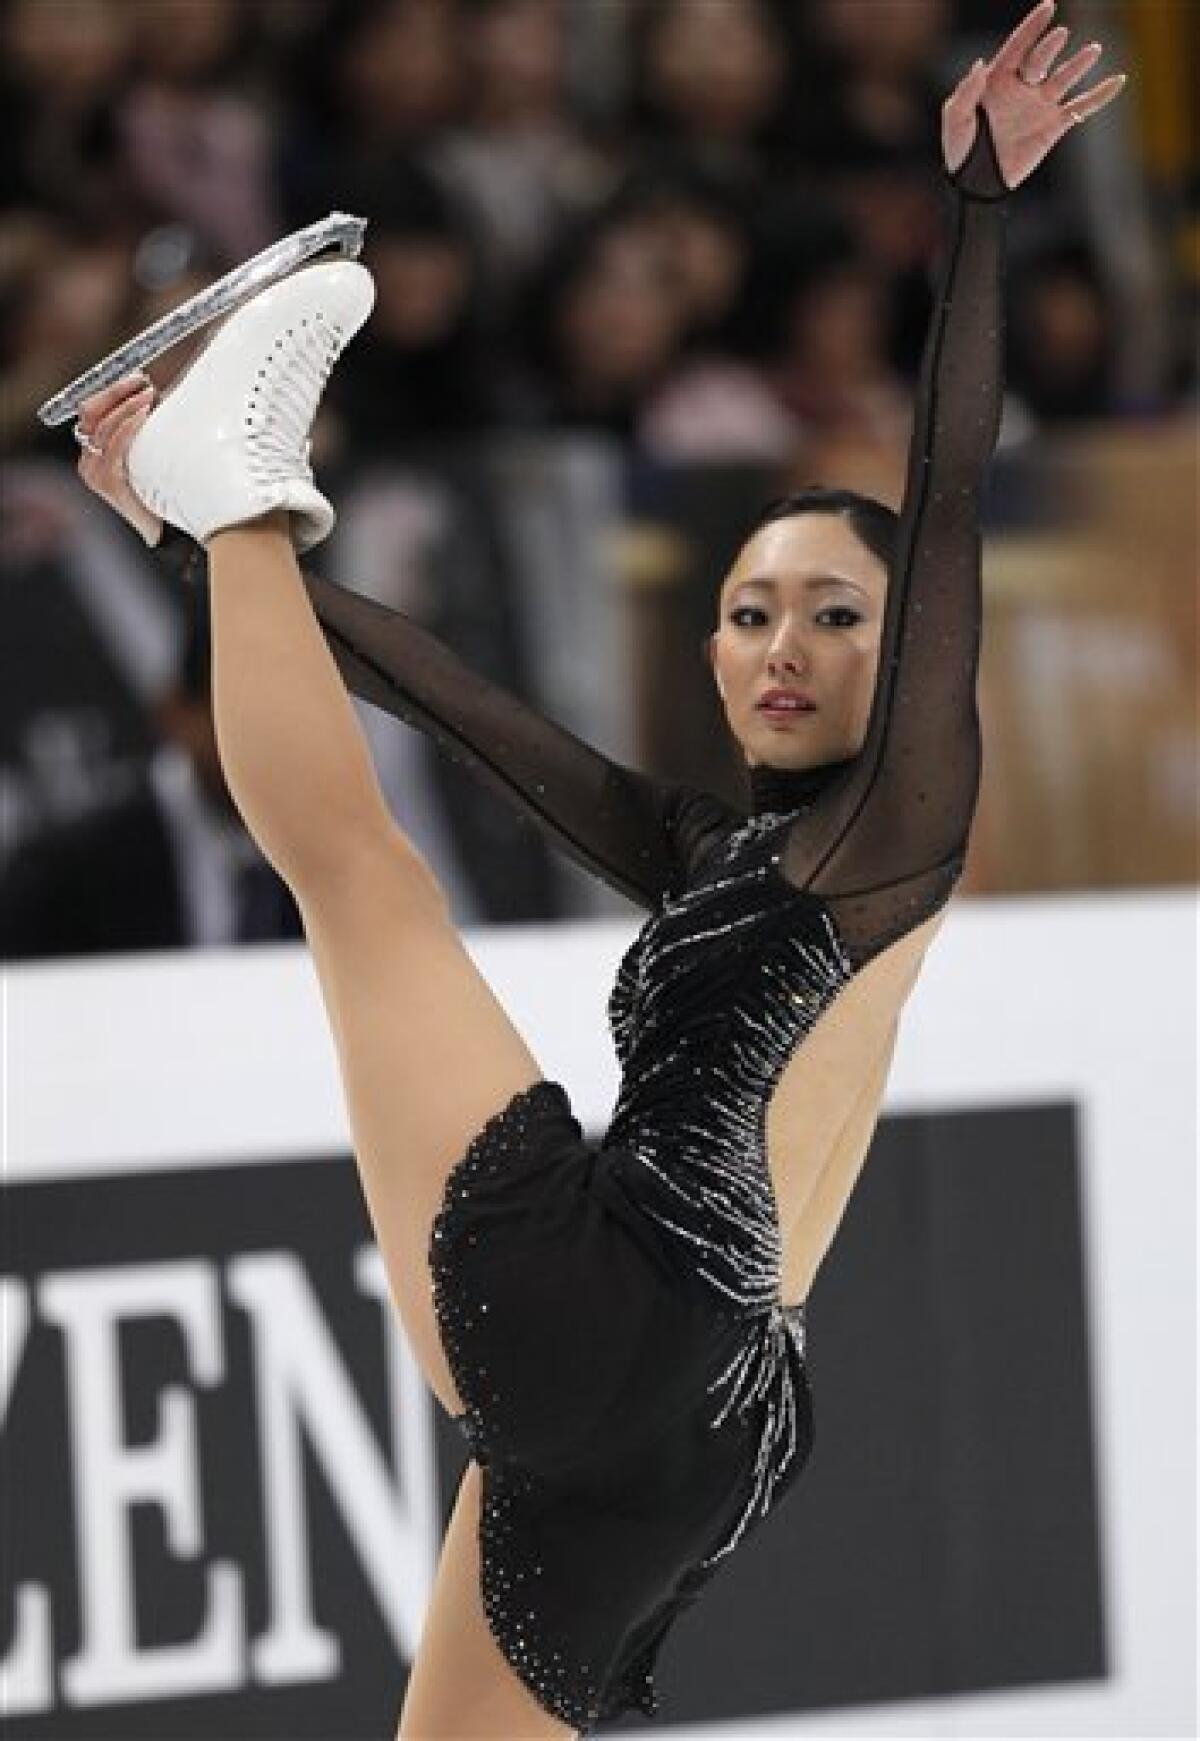 Japan's Miki Ando performs her free program at the ISU Figure Skating World championships in Moscow, Russia, Saturday, April 30, 2011. (AP Photo/Dmitry Lovetsky)